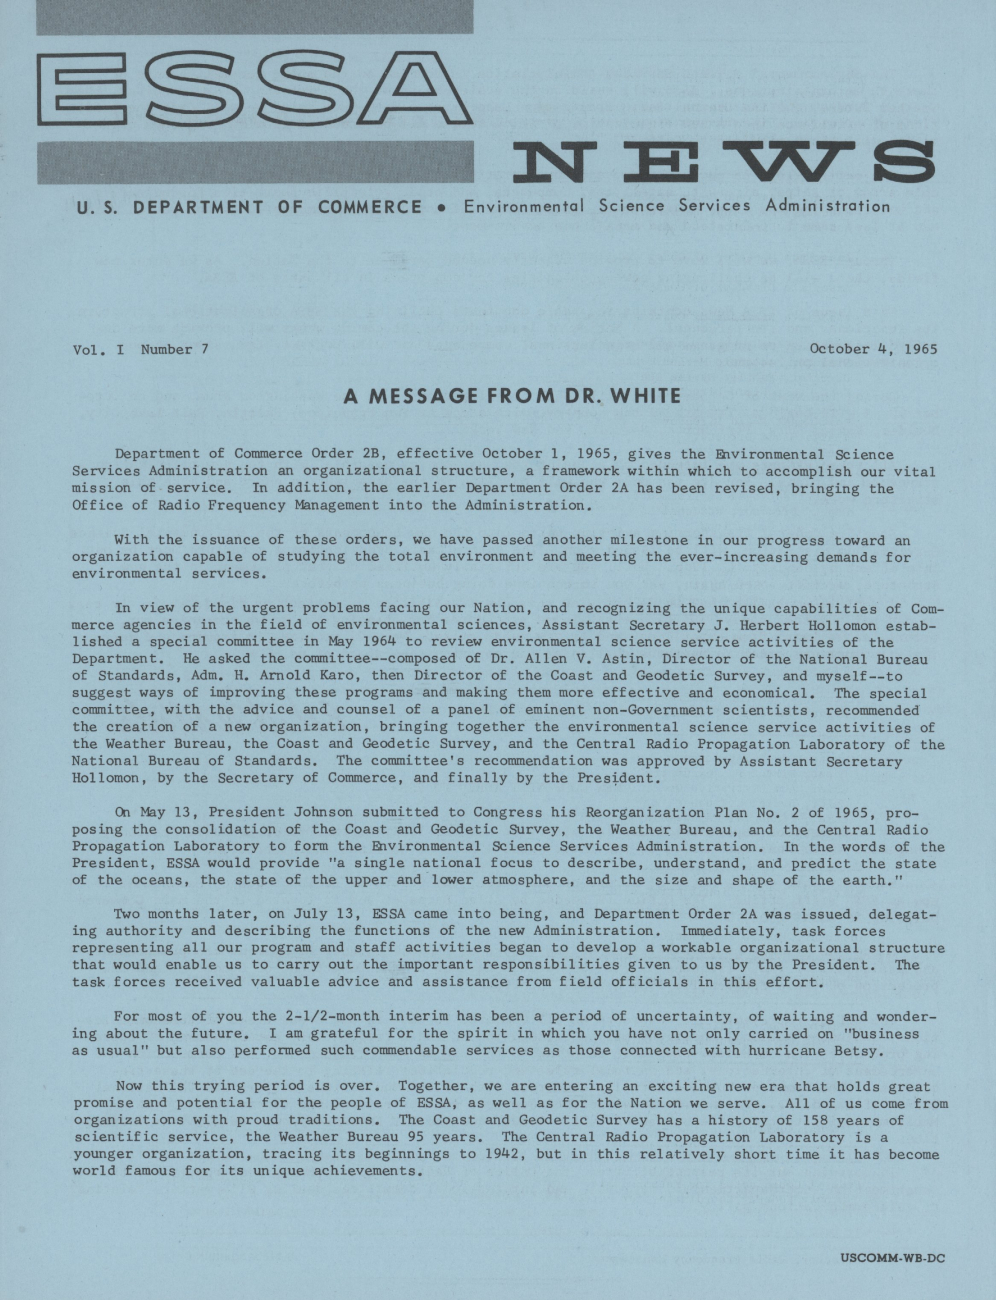 Page 1 of Volume I, Number 7, of ESSA News